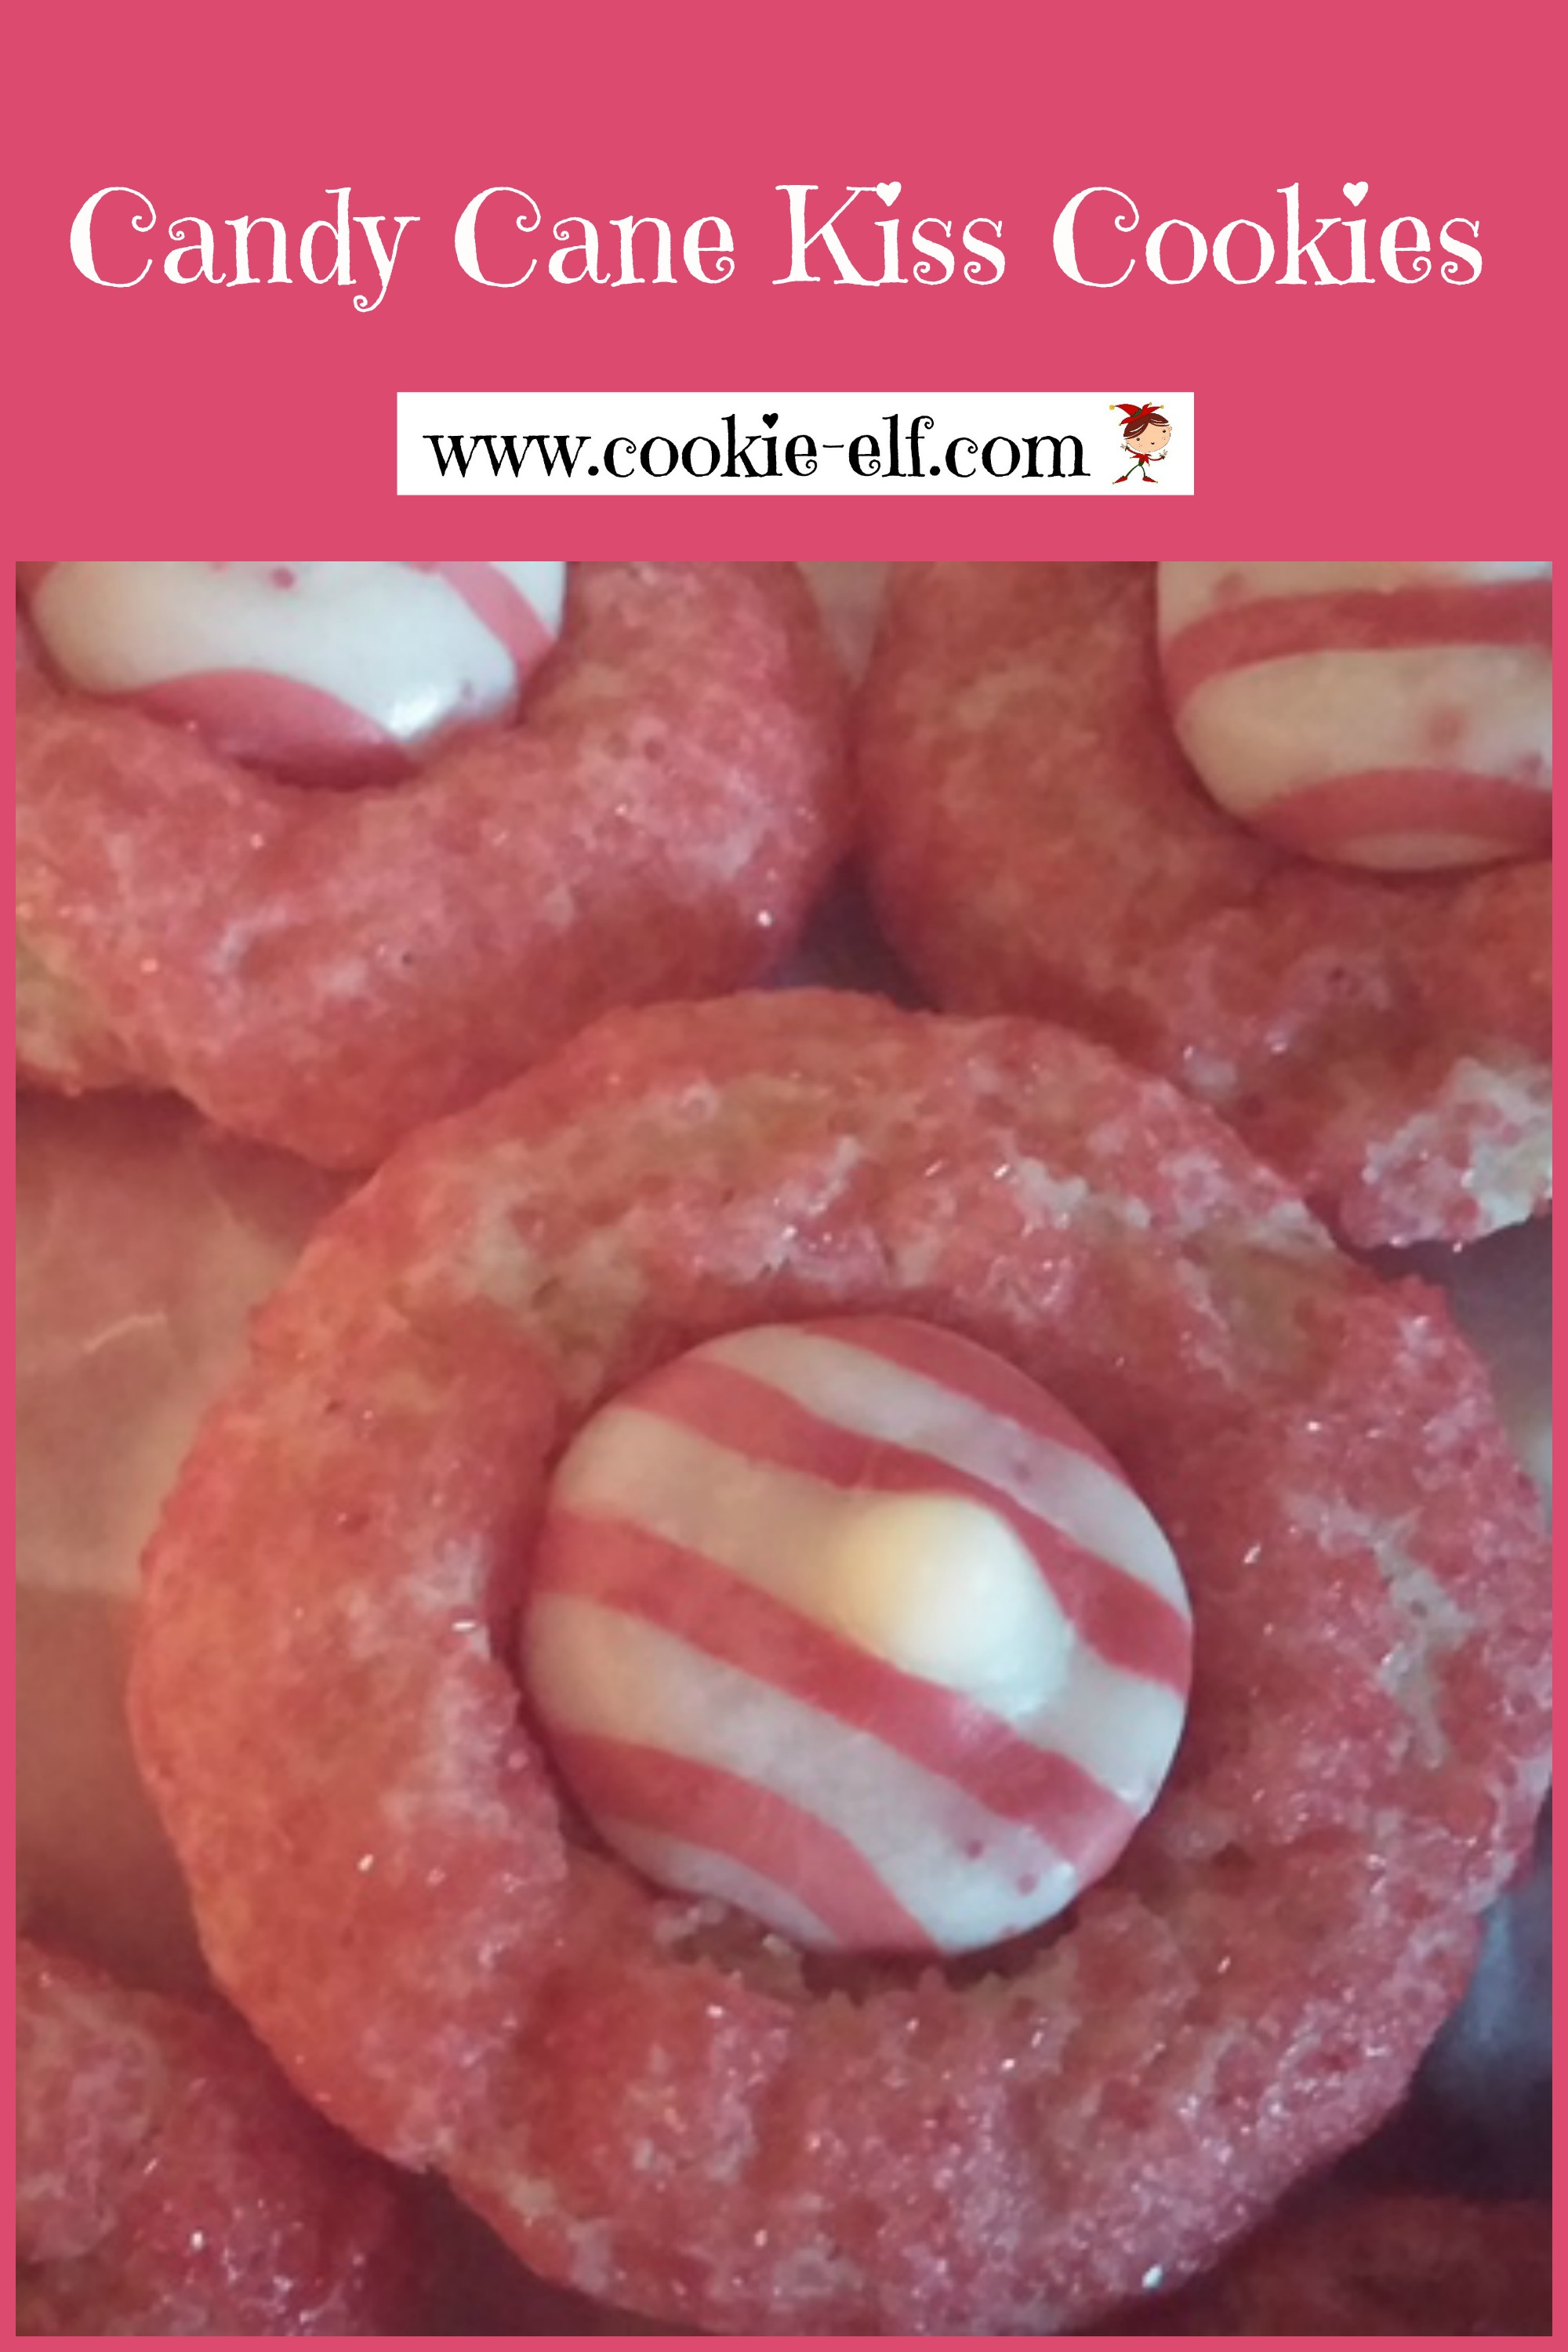 Candy Cane Kiss Cookies from The Cookie Elf